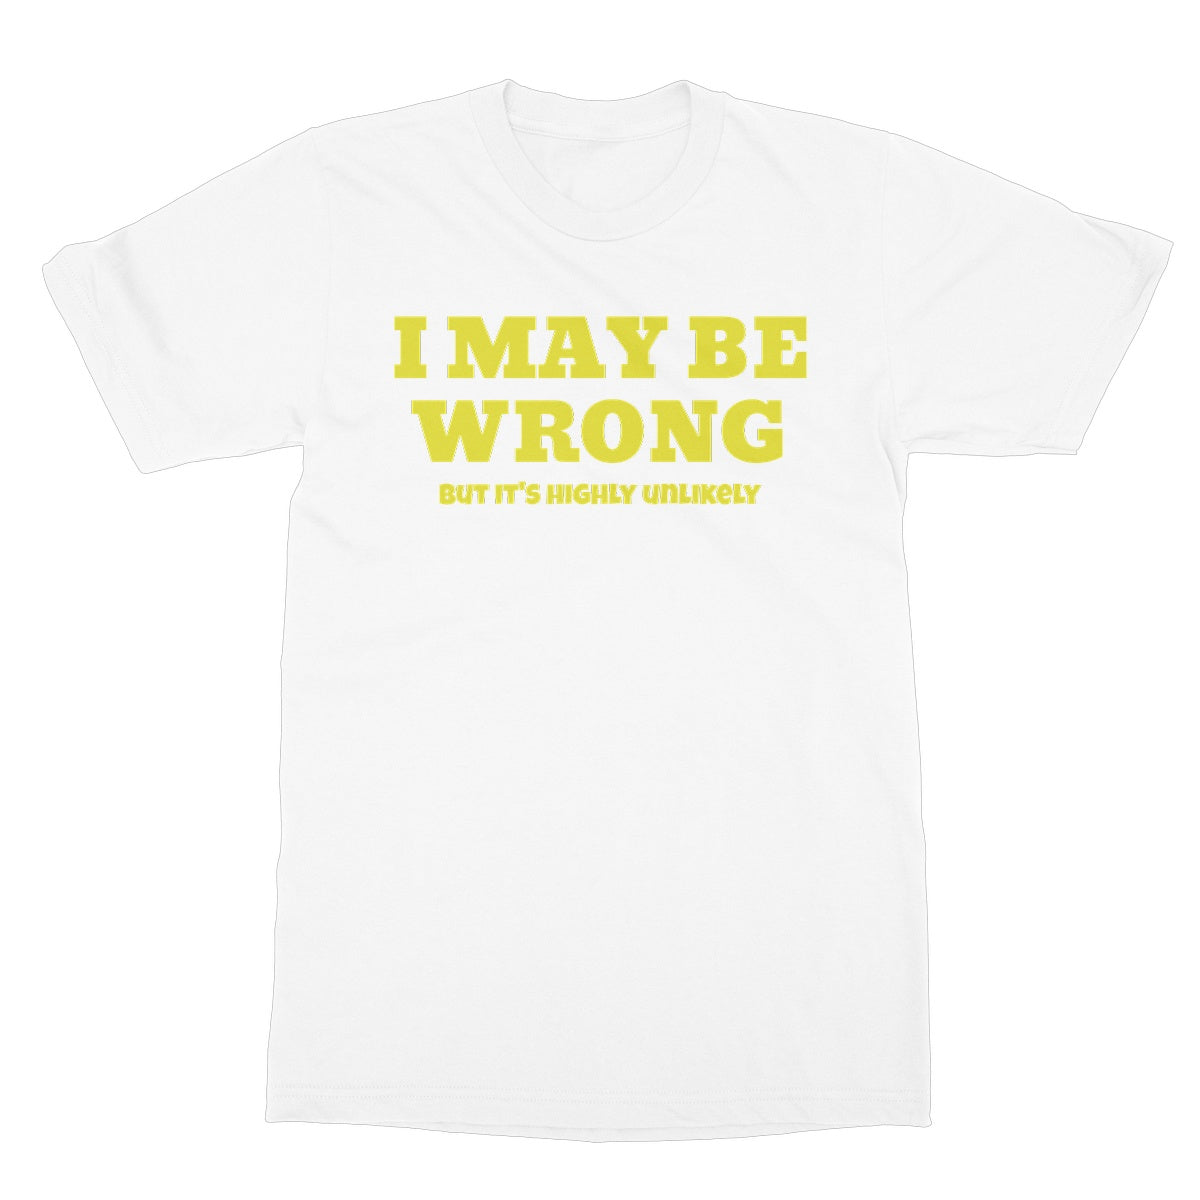 I may be wrong but its unlikely t shirt white